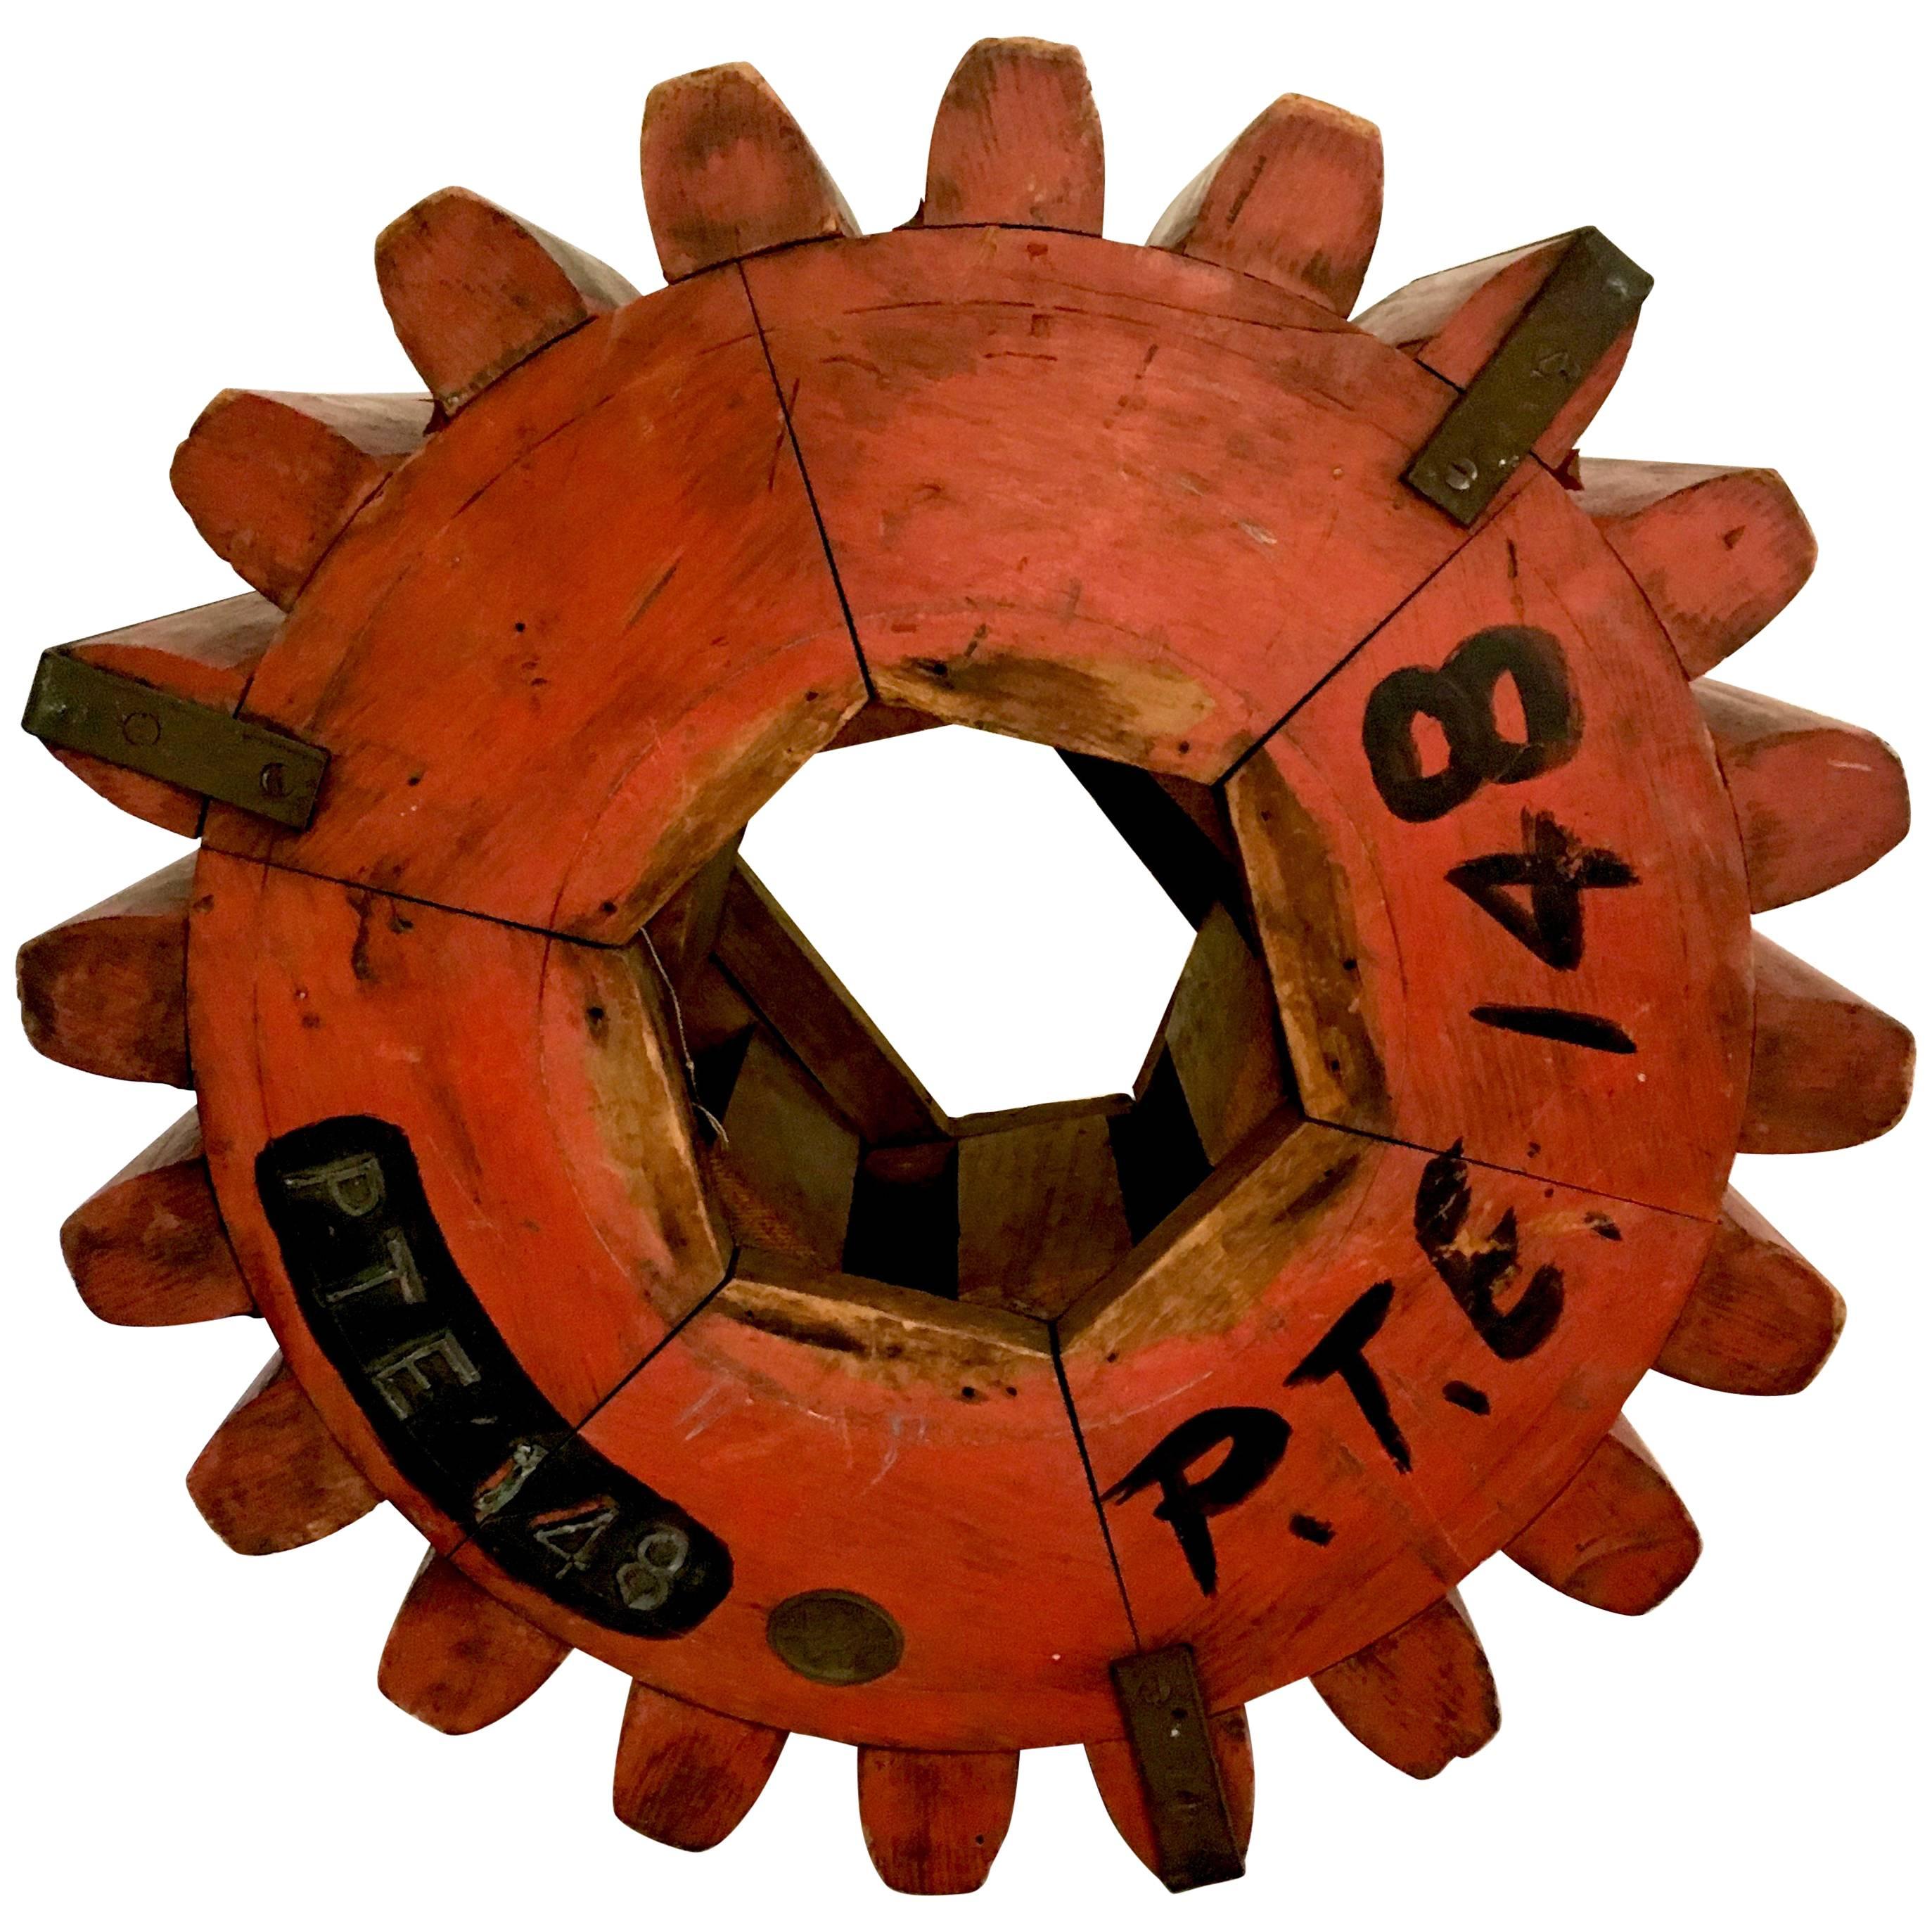 Monumental Architectural Industrial Wooden Gear Cog